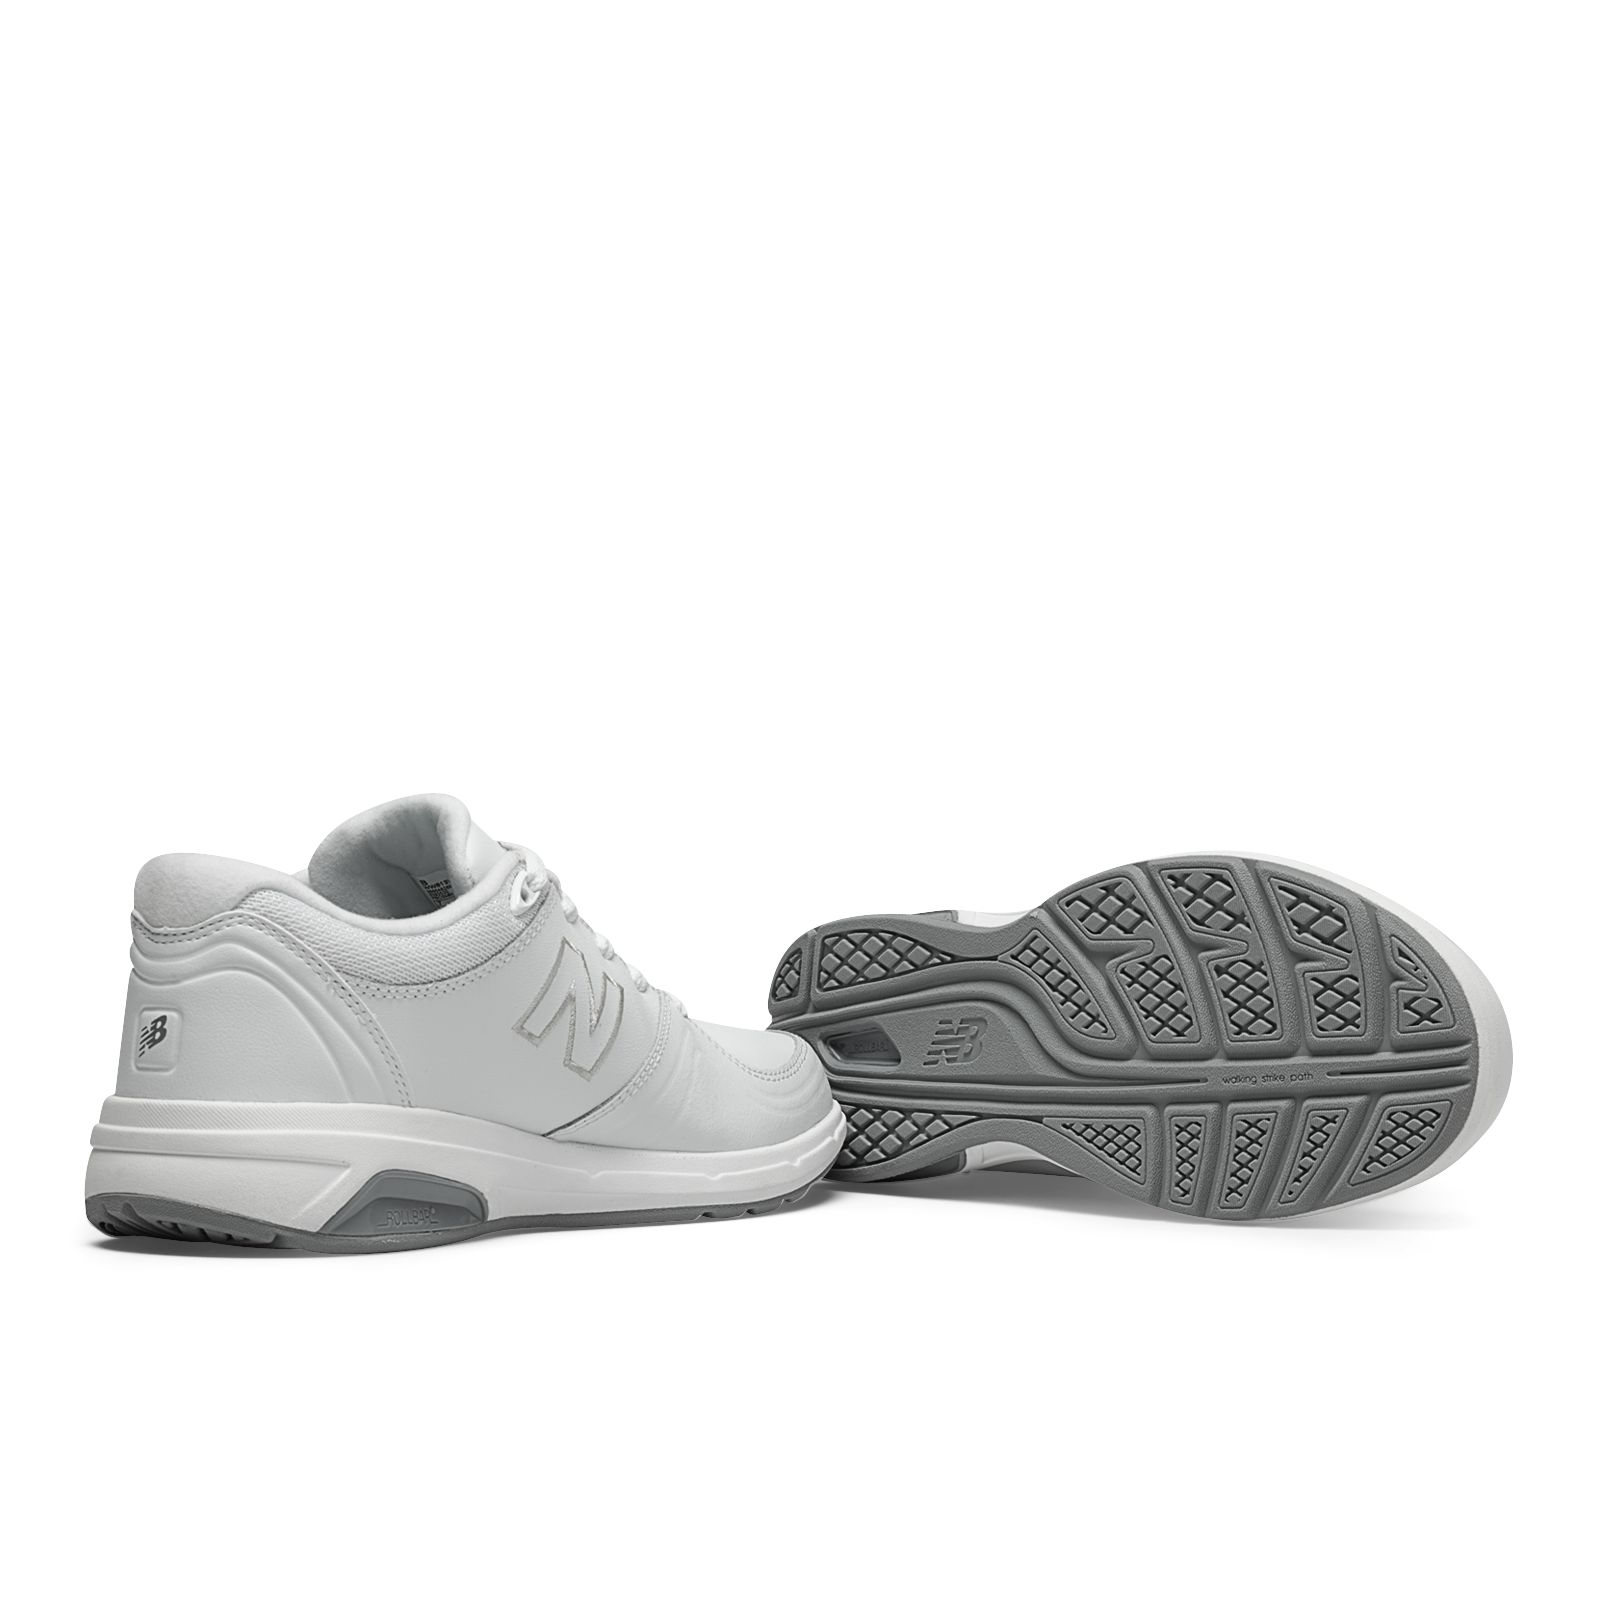 new balance 813 women's athletic shoes